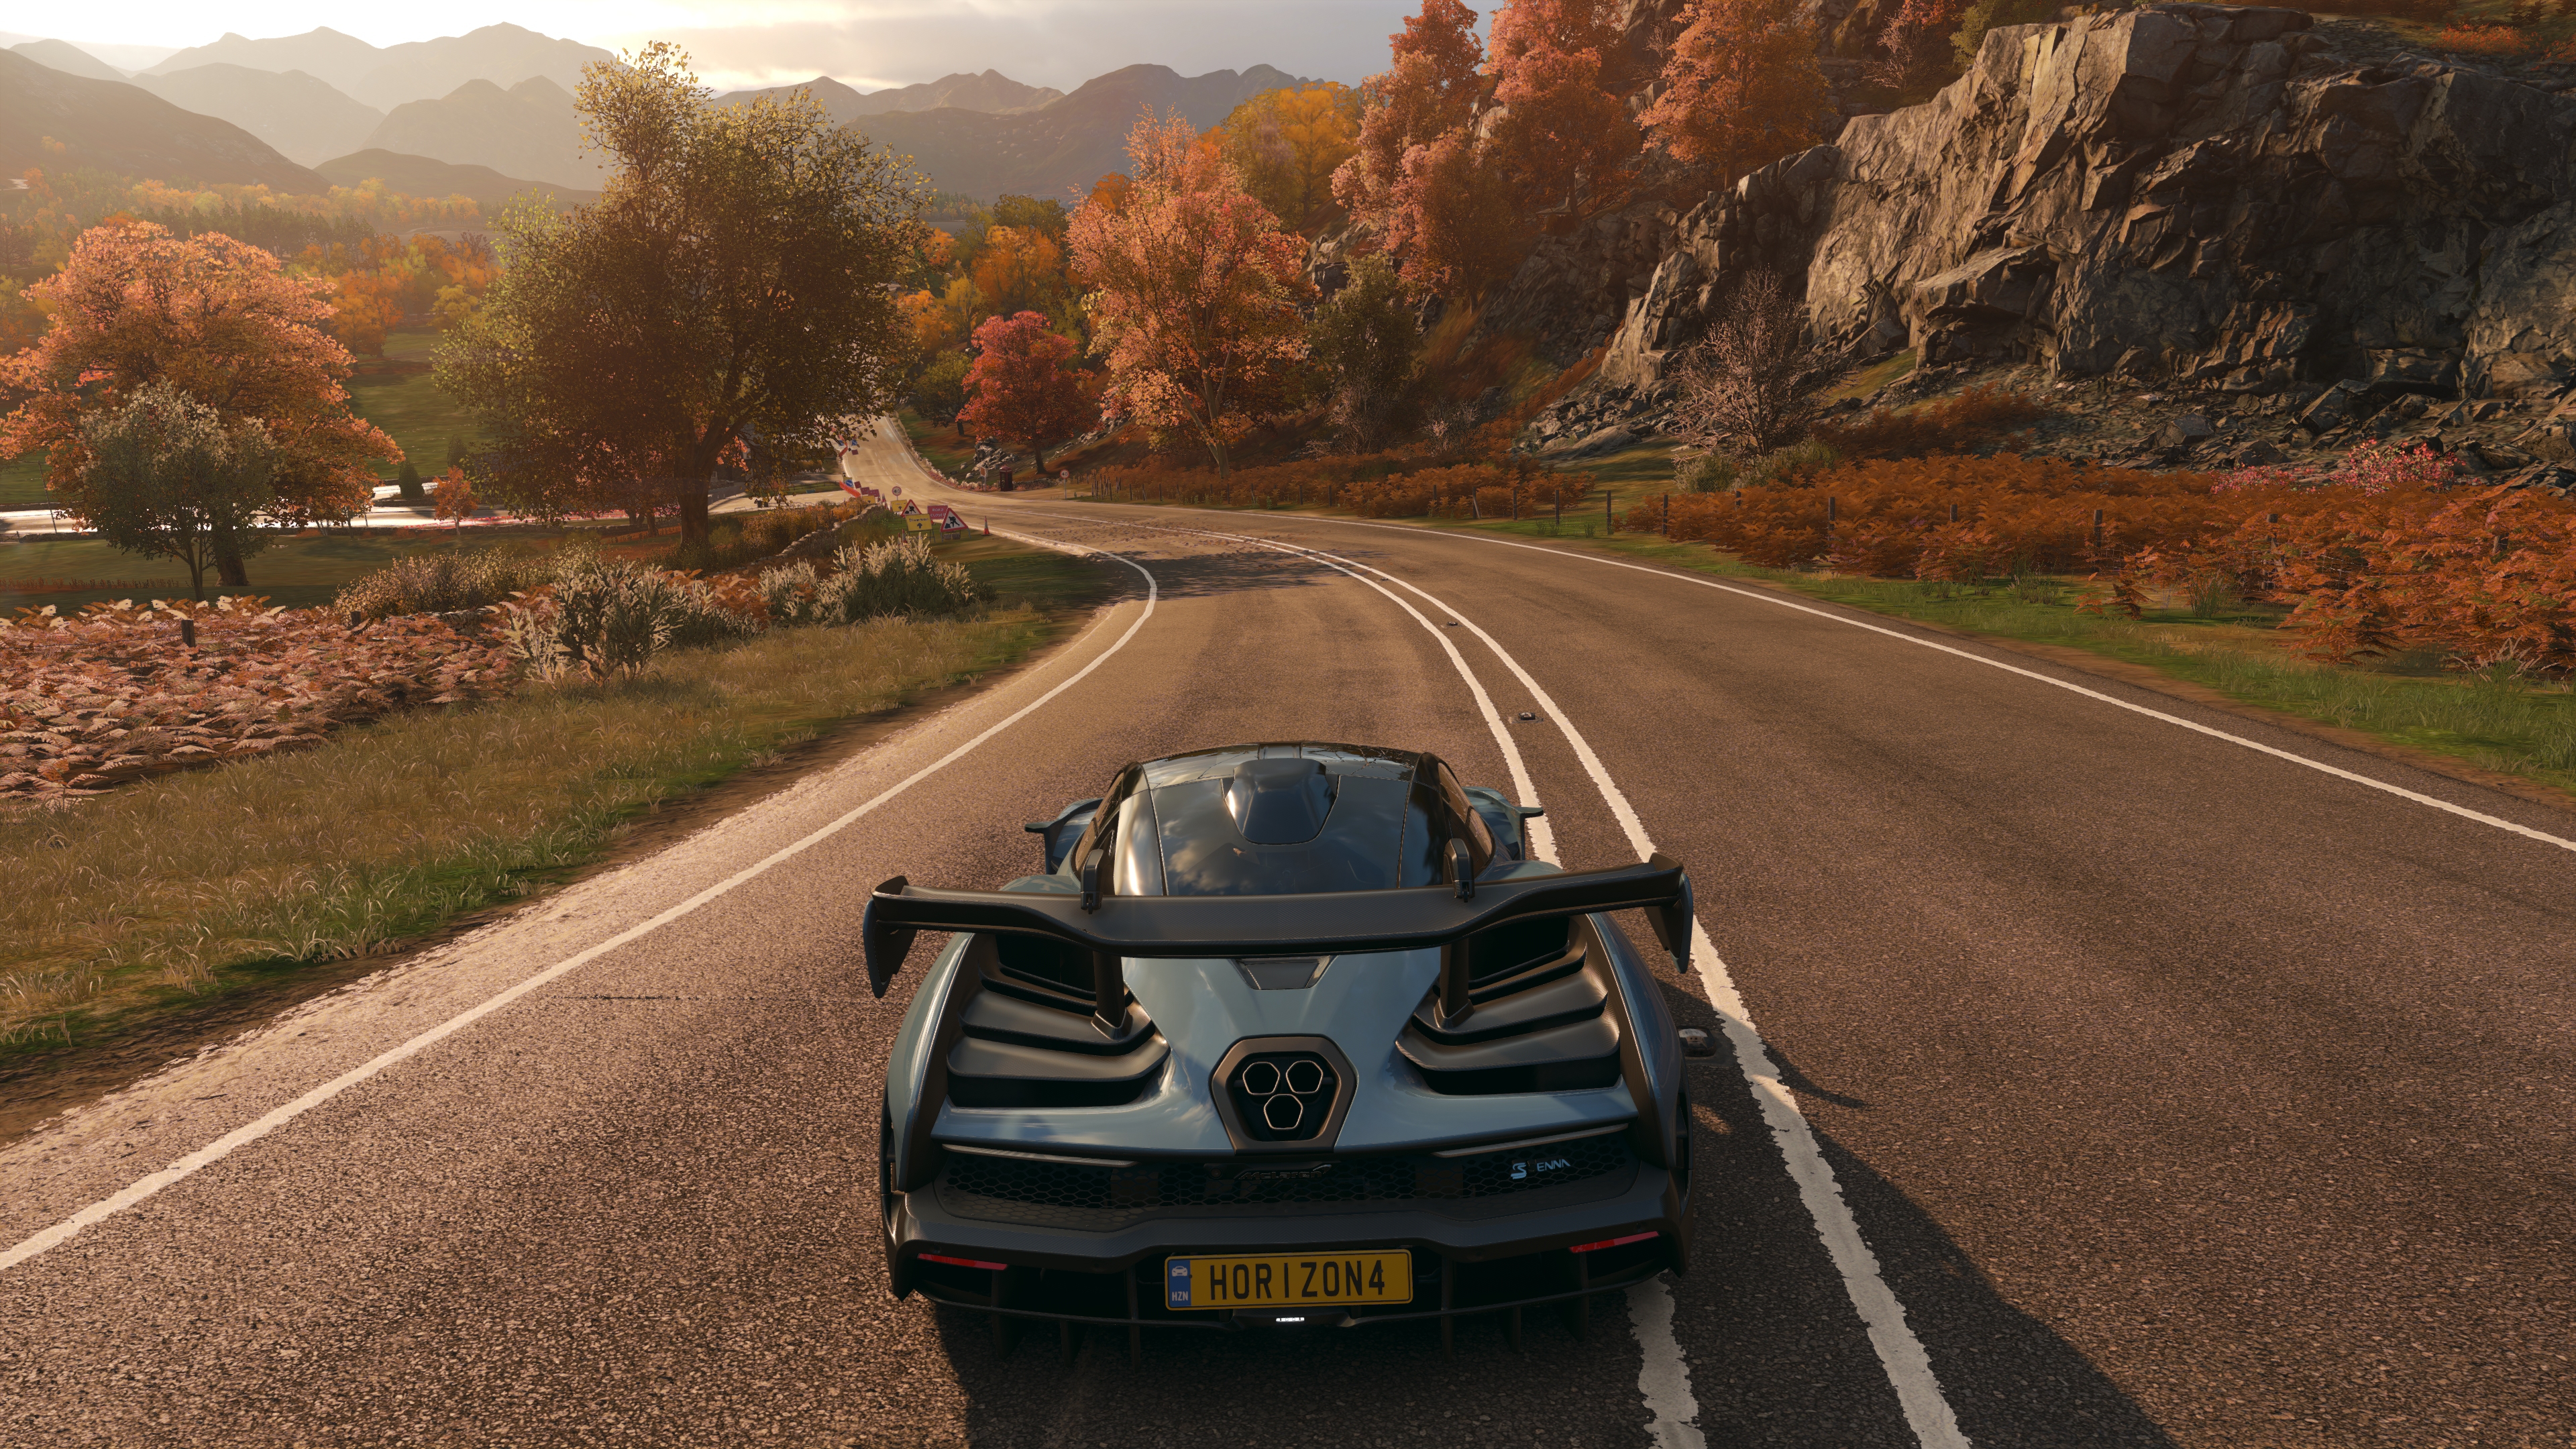 forza horizon 4 demo how to get unlimited money